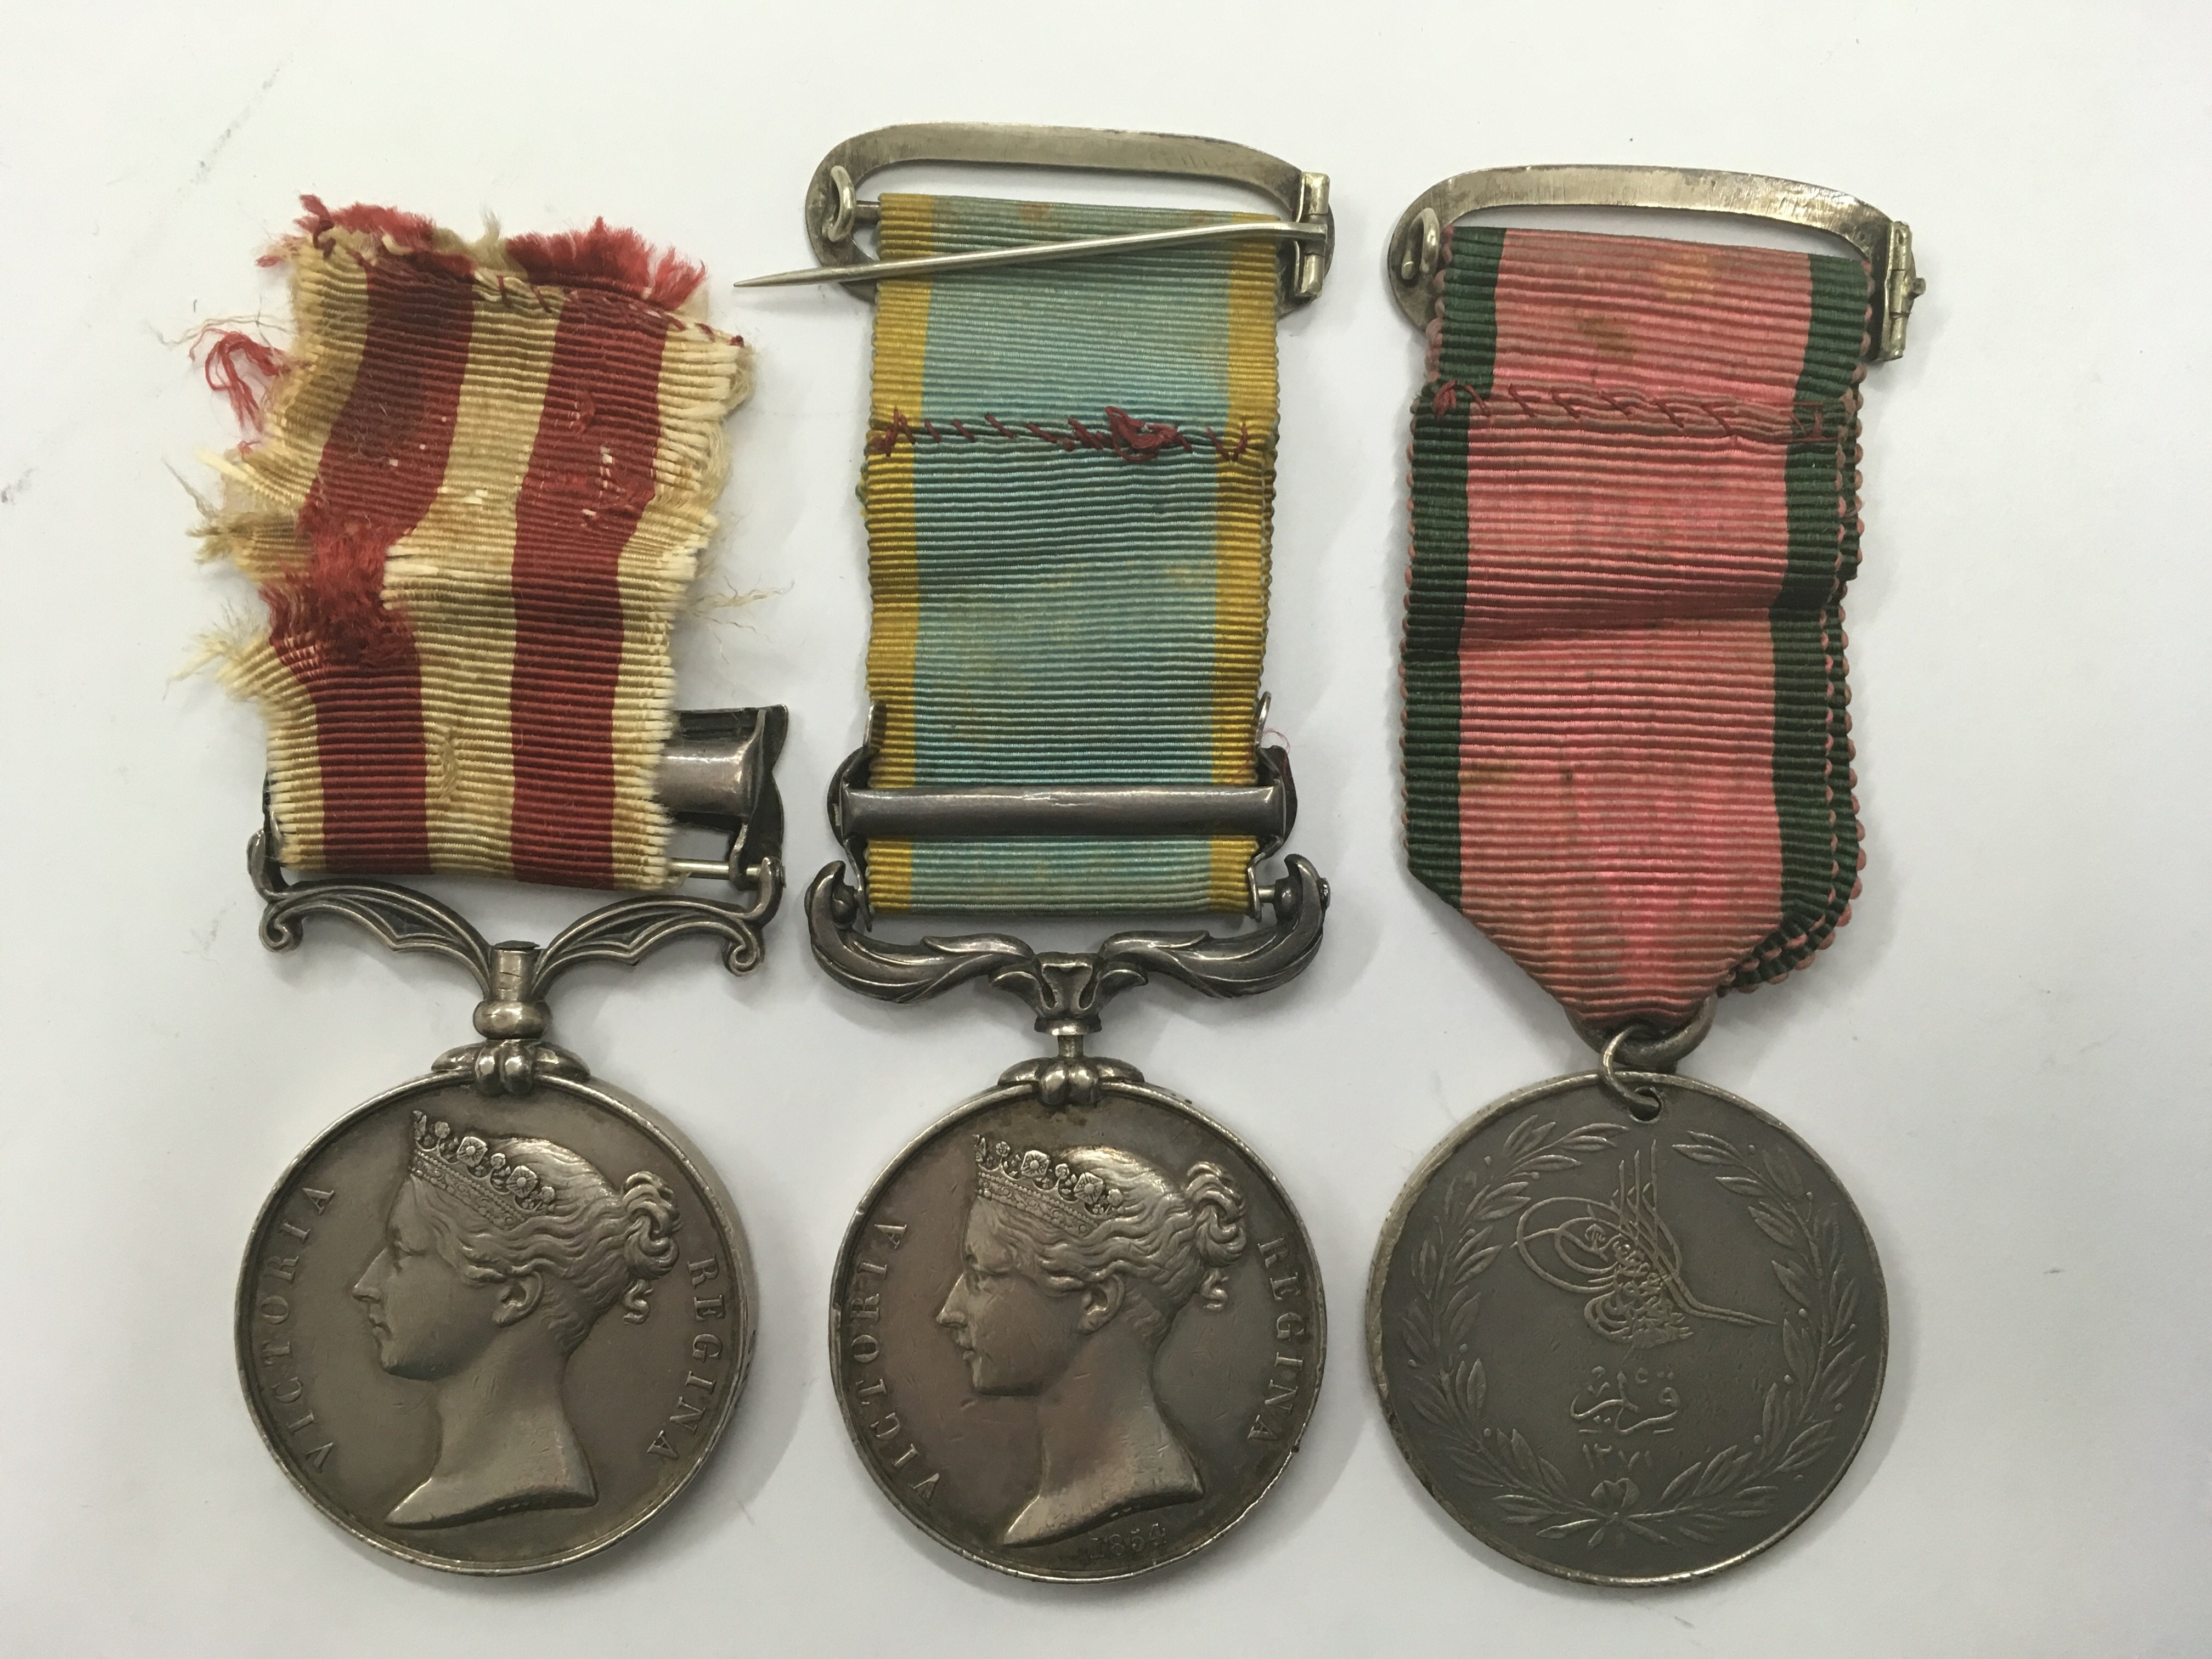 A group of 3 Victorian War medals. An Indian mutiny medal with 'Central India' bar awarded to - Image 2 of 3